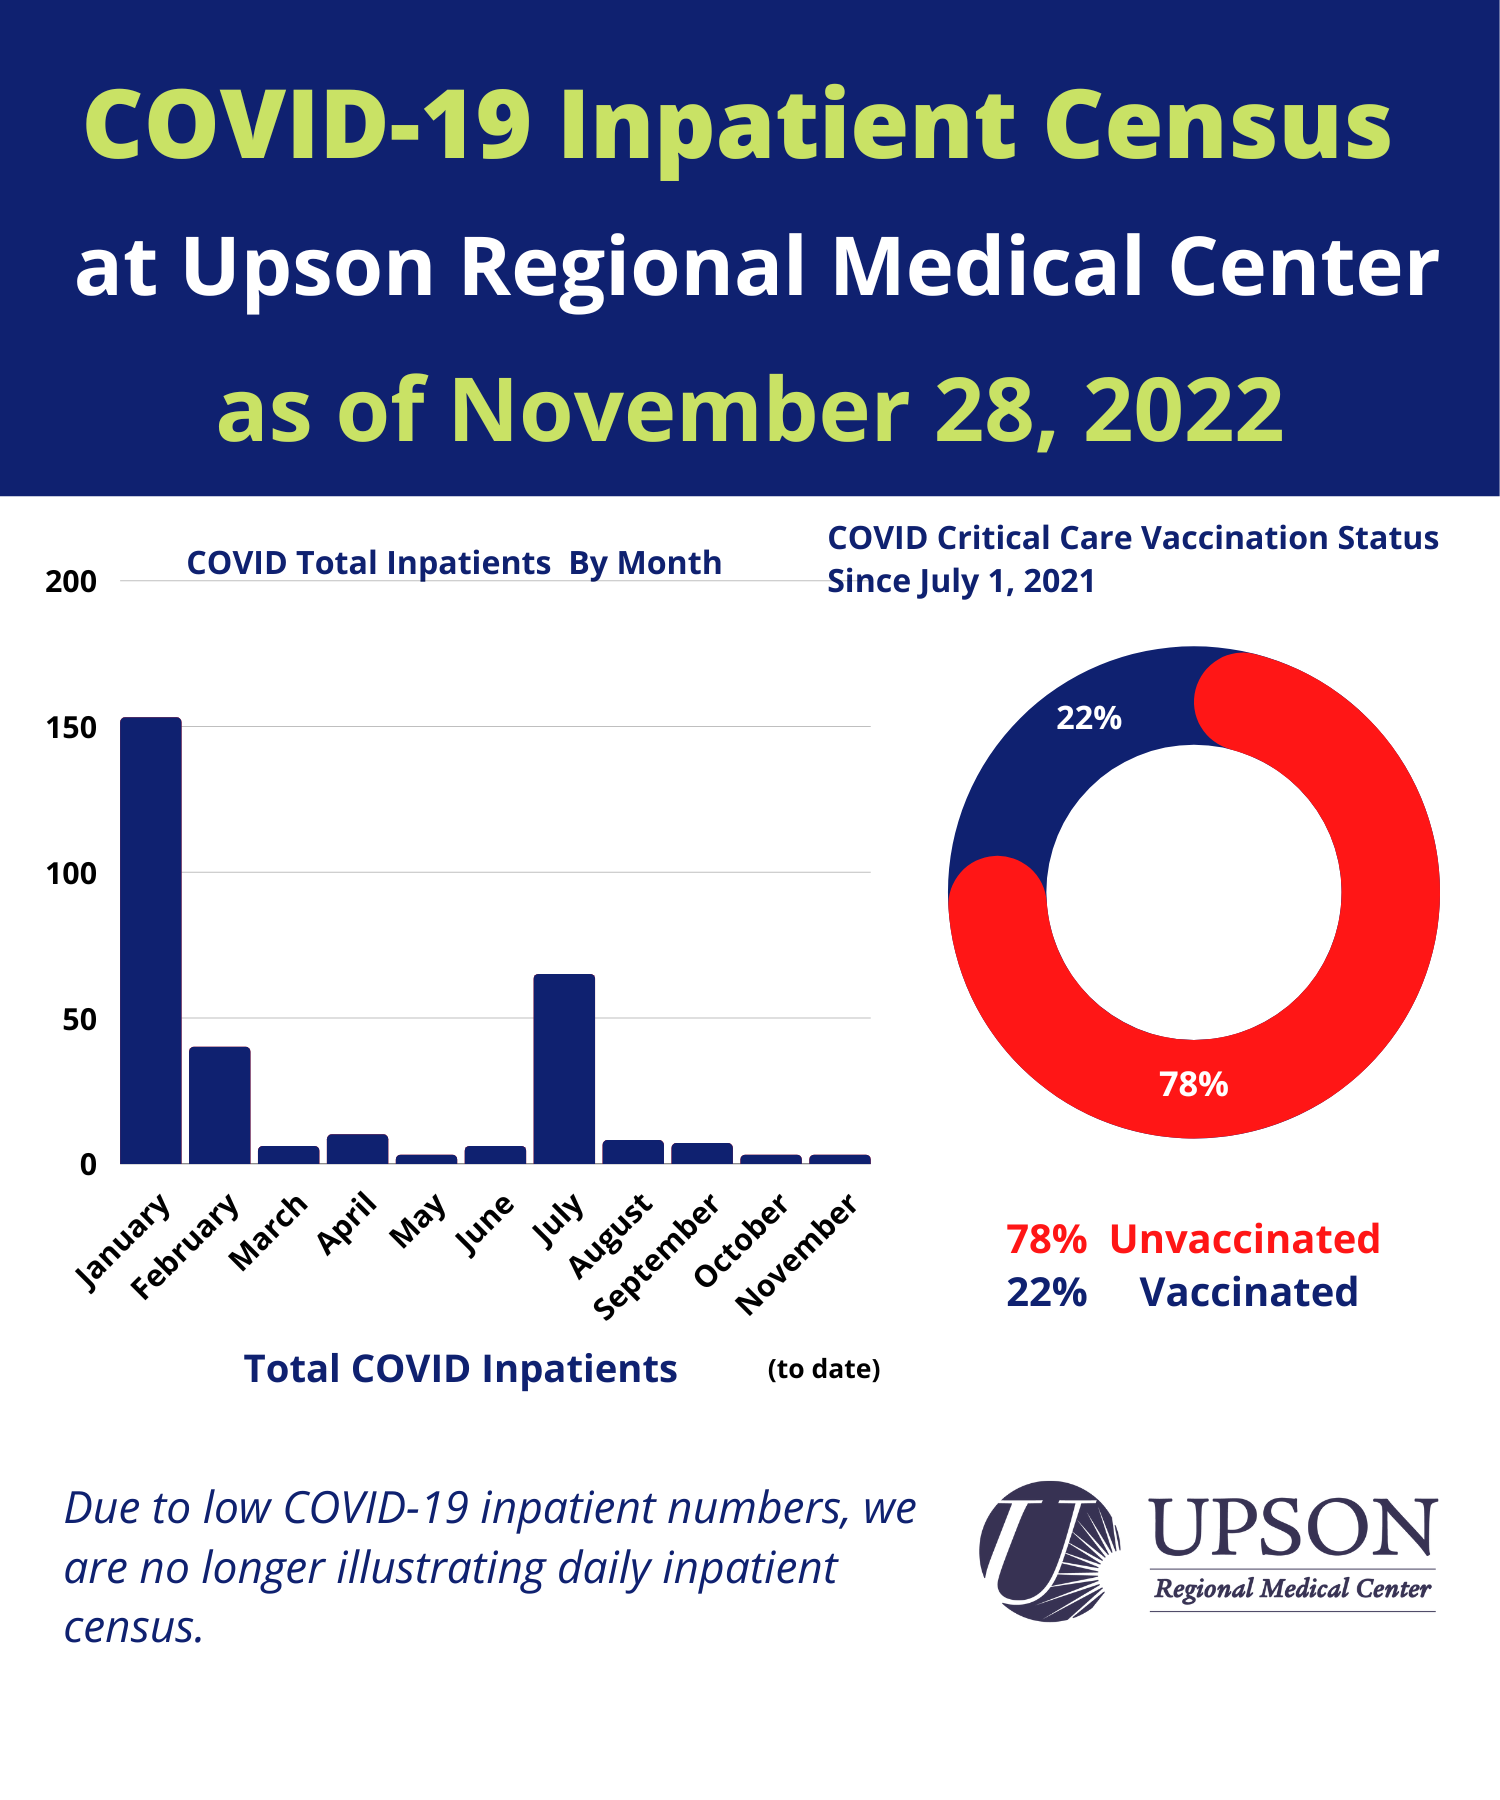 Photo for URMC COVID-19 inpatient status as of November 28, 2022.